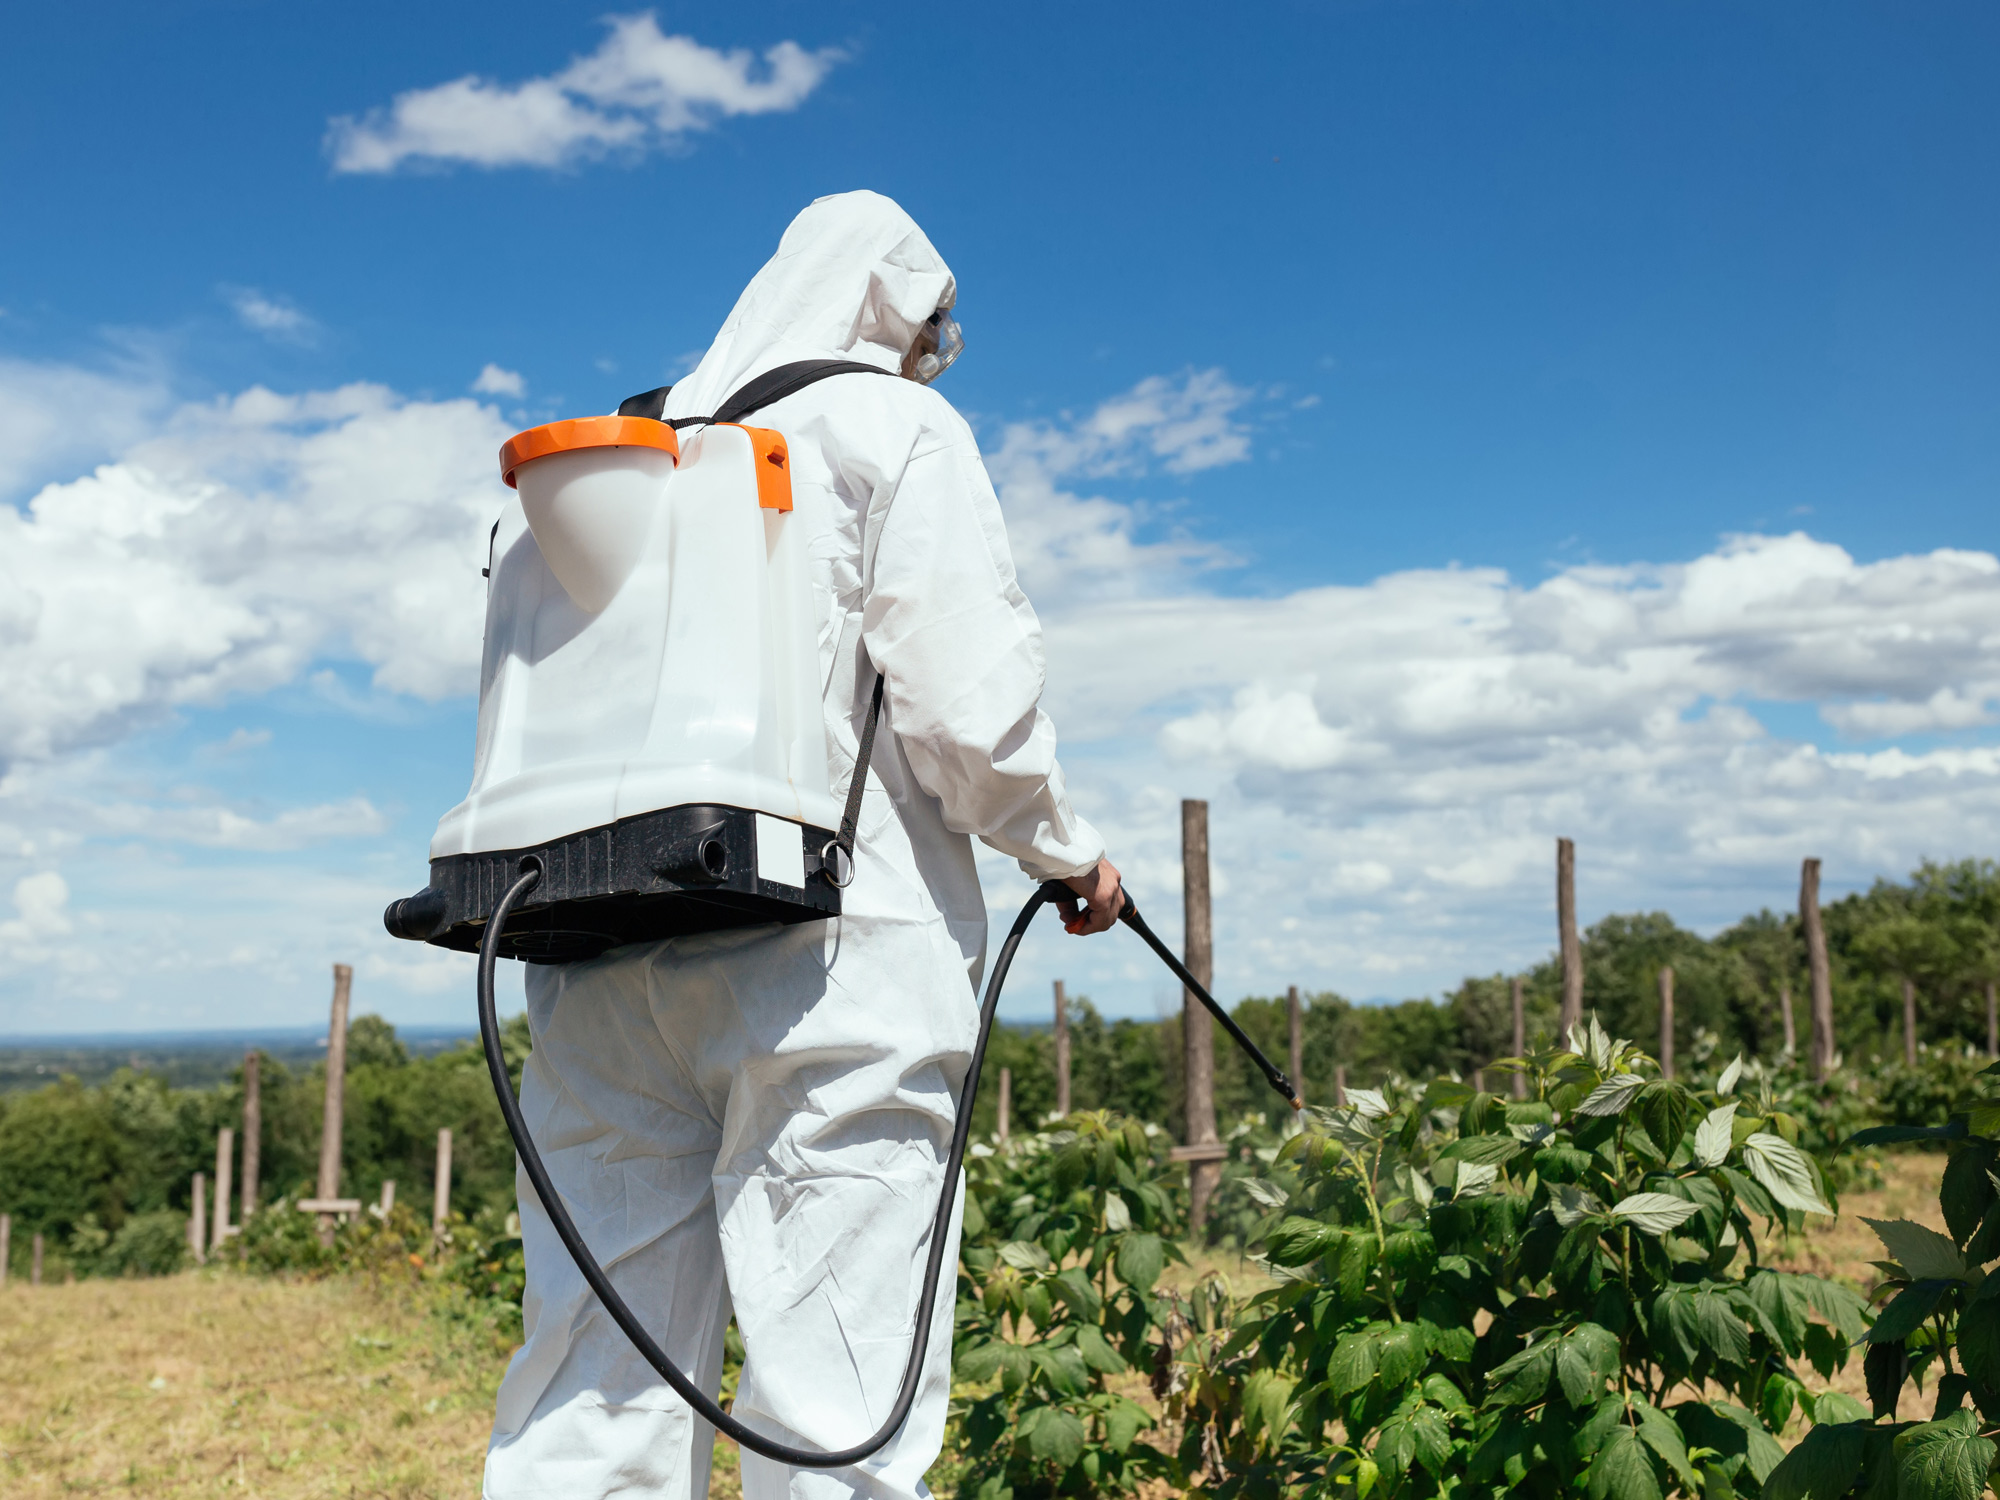 Treating herbicide buildup in your body